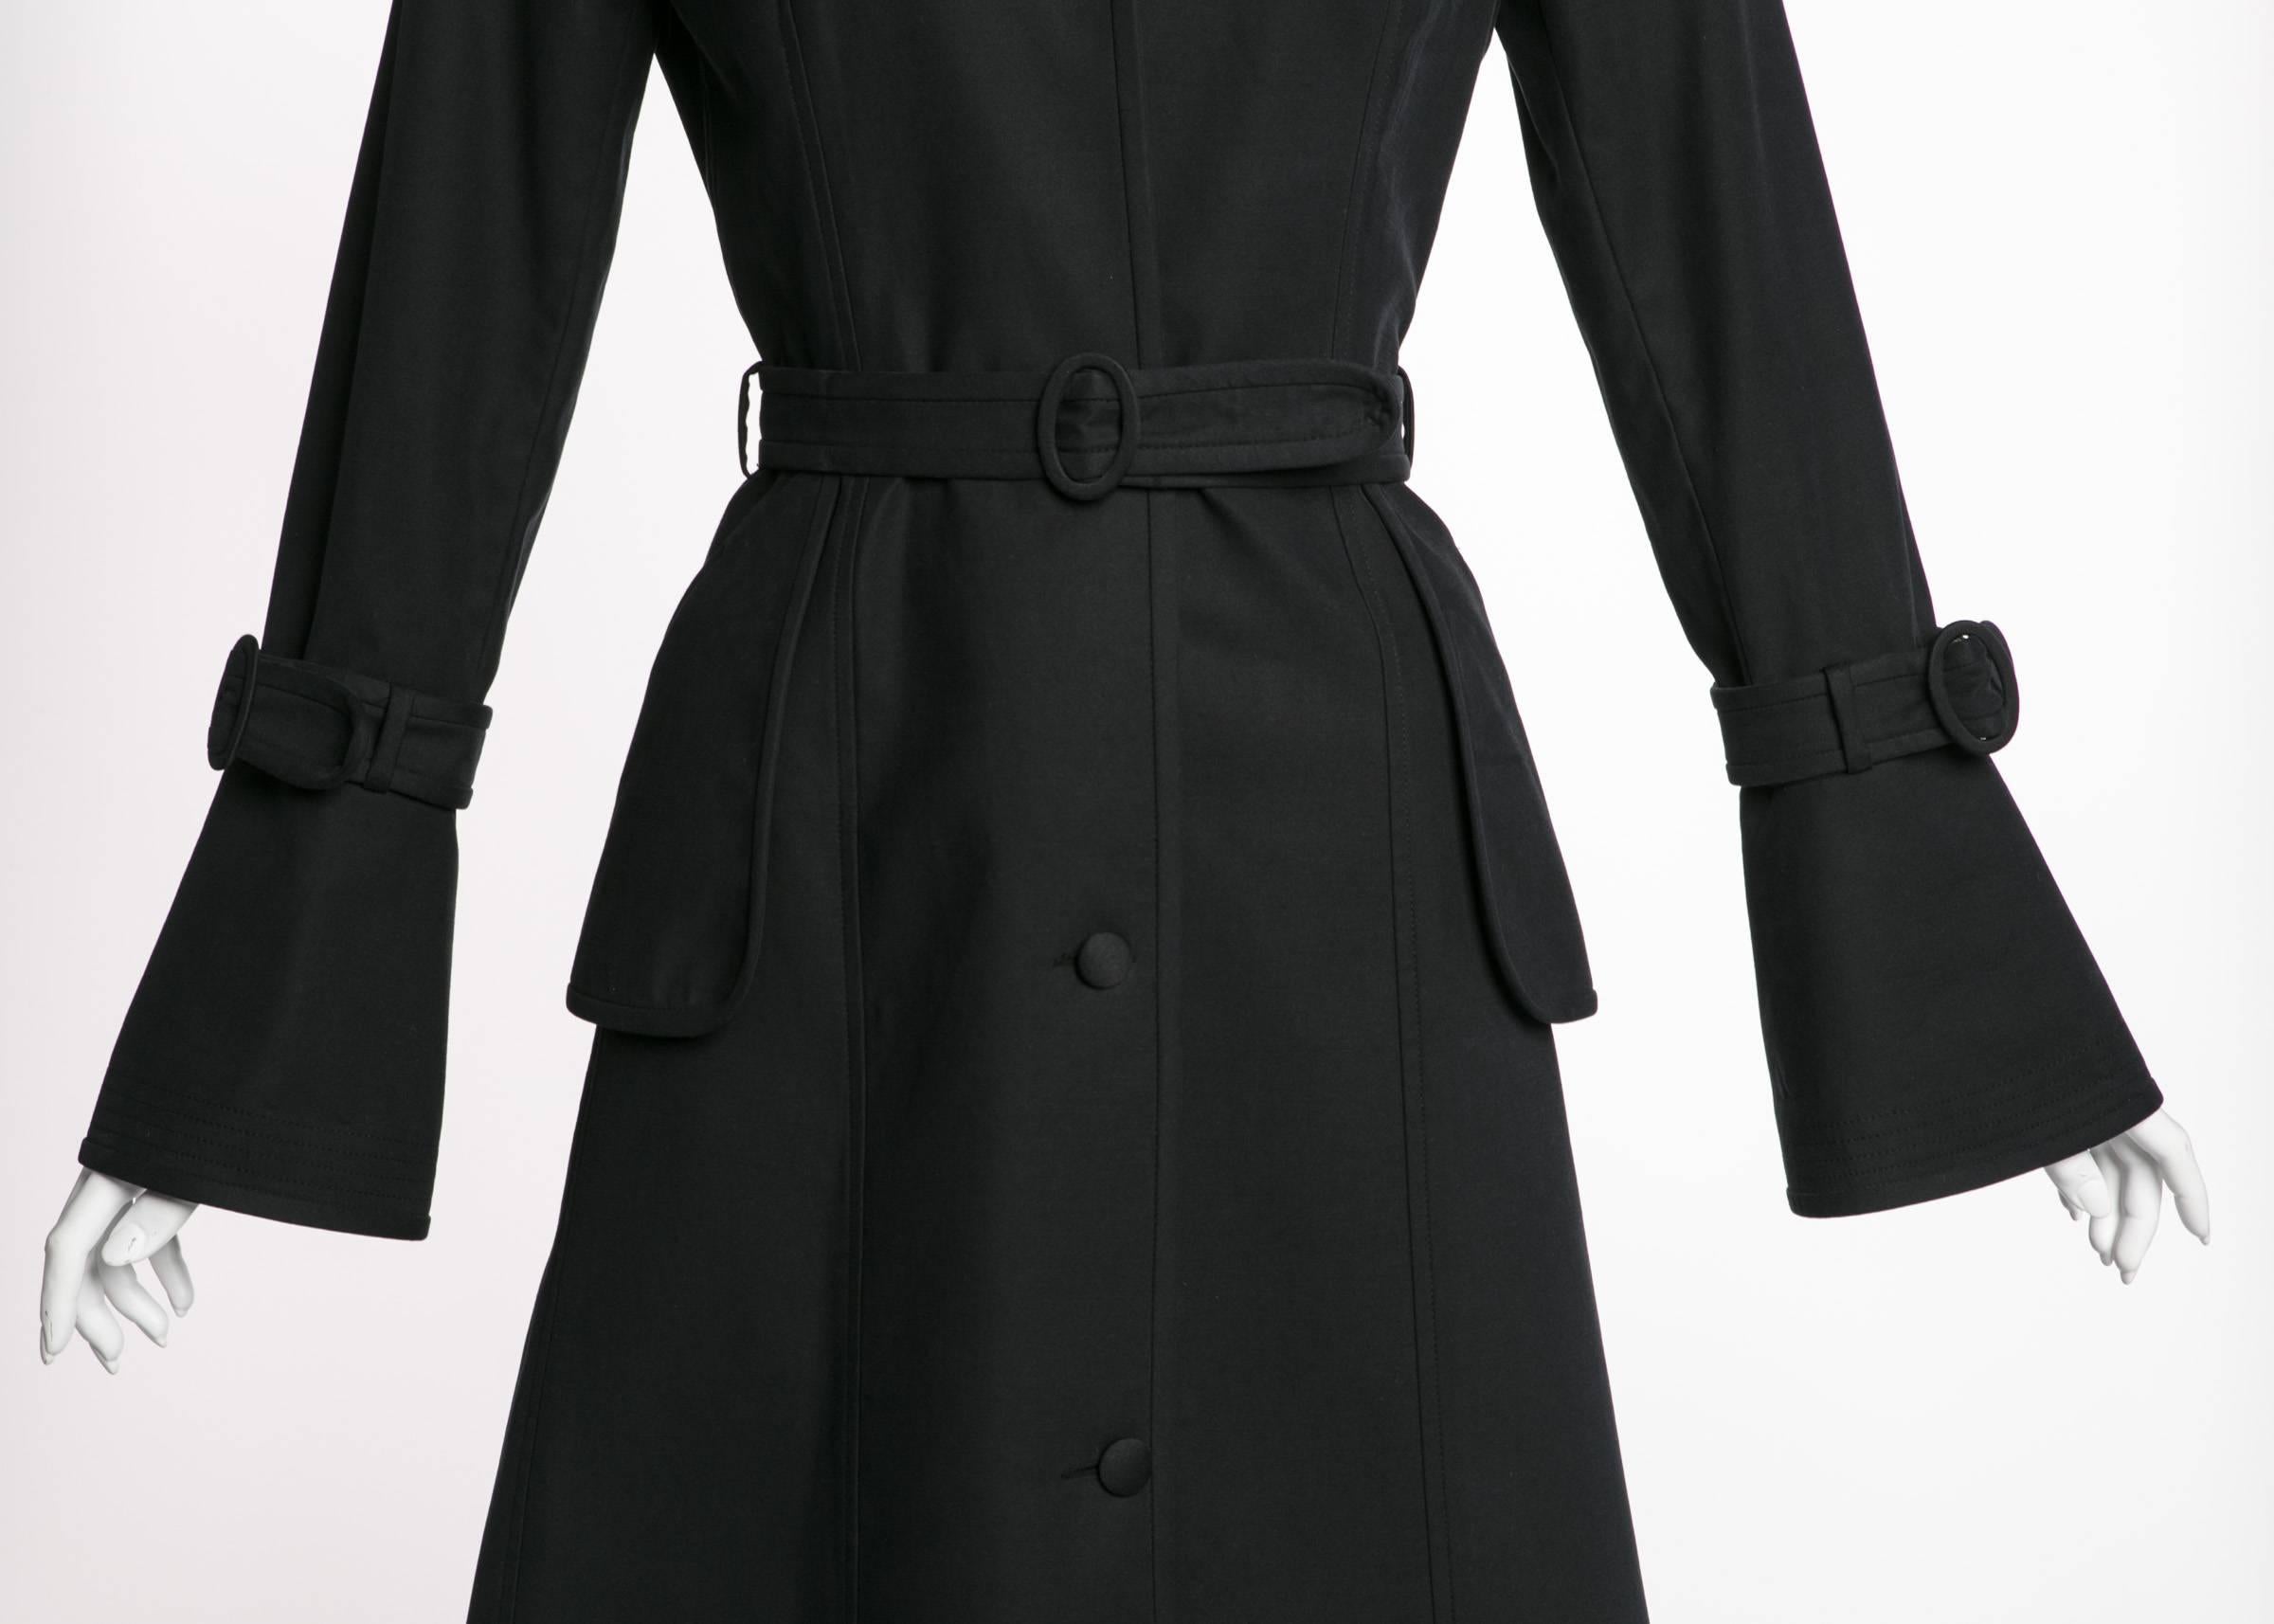 A black trench is both seductive and classic. This beautiful version by Martin Grant has subtle femininity and embodies a WWD article that calls his work “…perfect fare for an Audrey Hepburn type,” (8 Oct 2004). Indeed, the Australian born designer